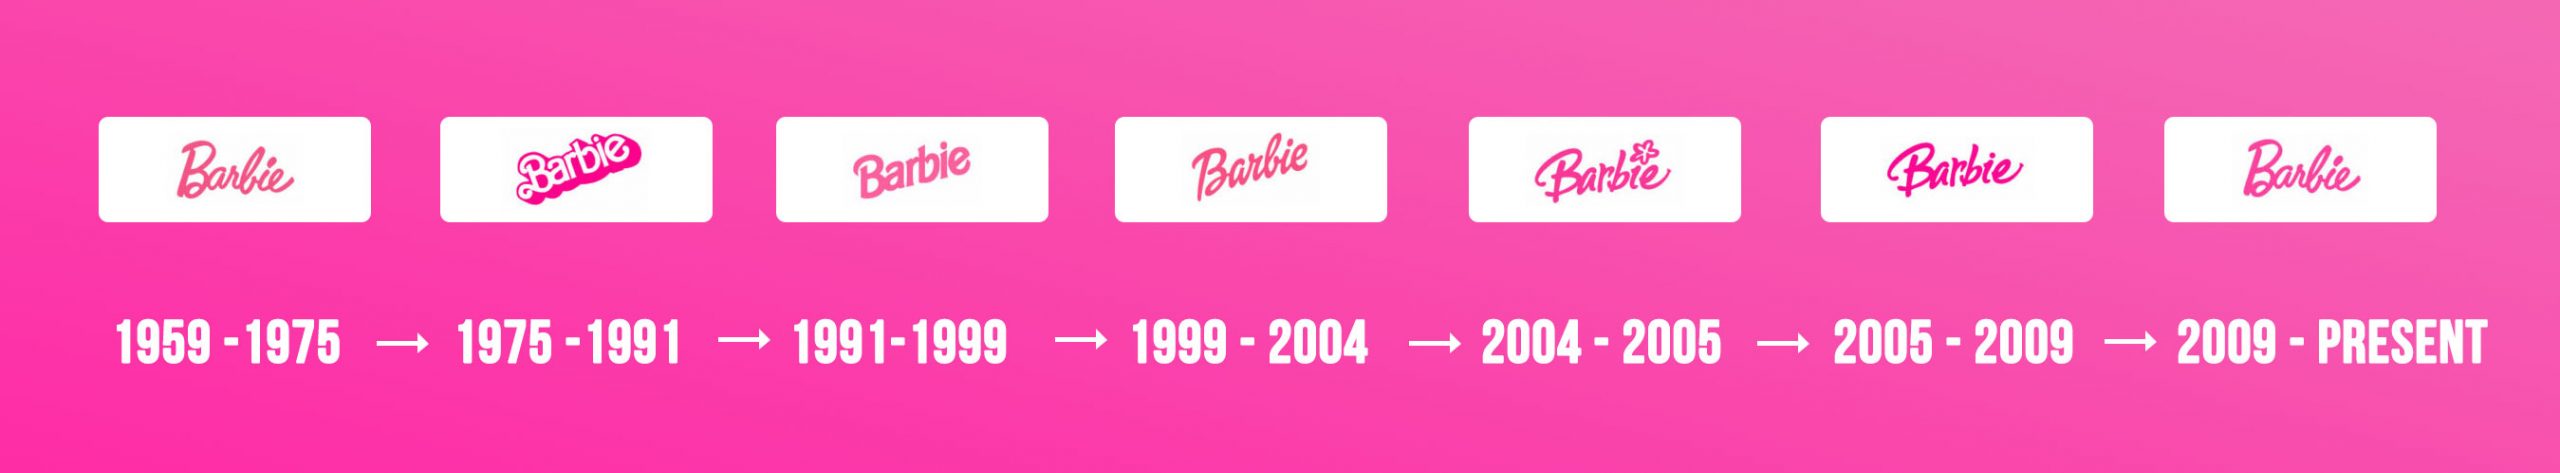 Barbie Logo: The Vibrant History of an Iconic Brand